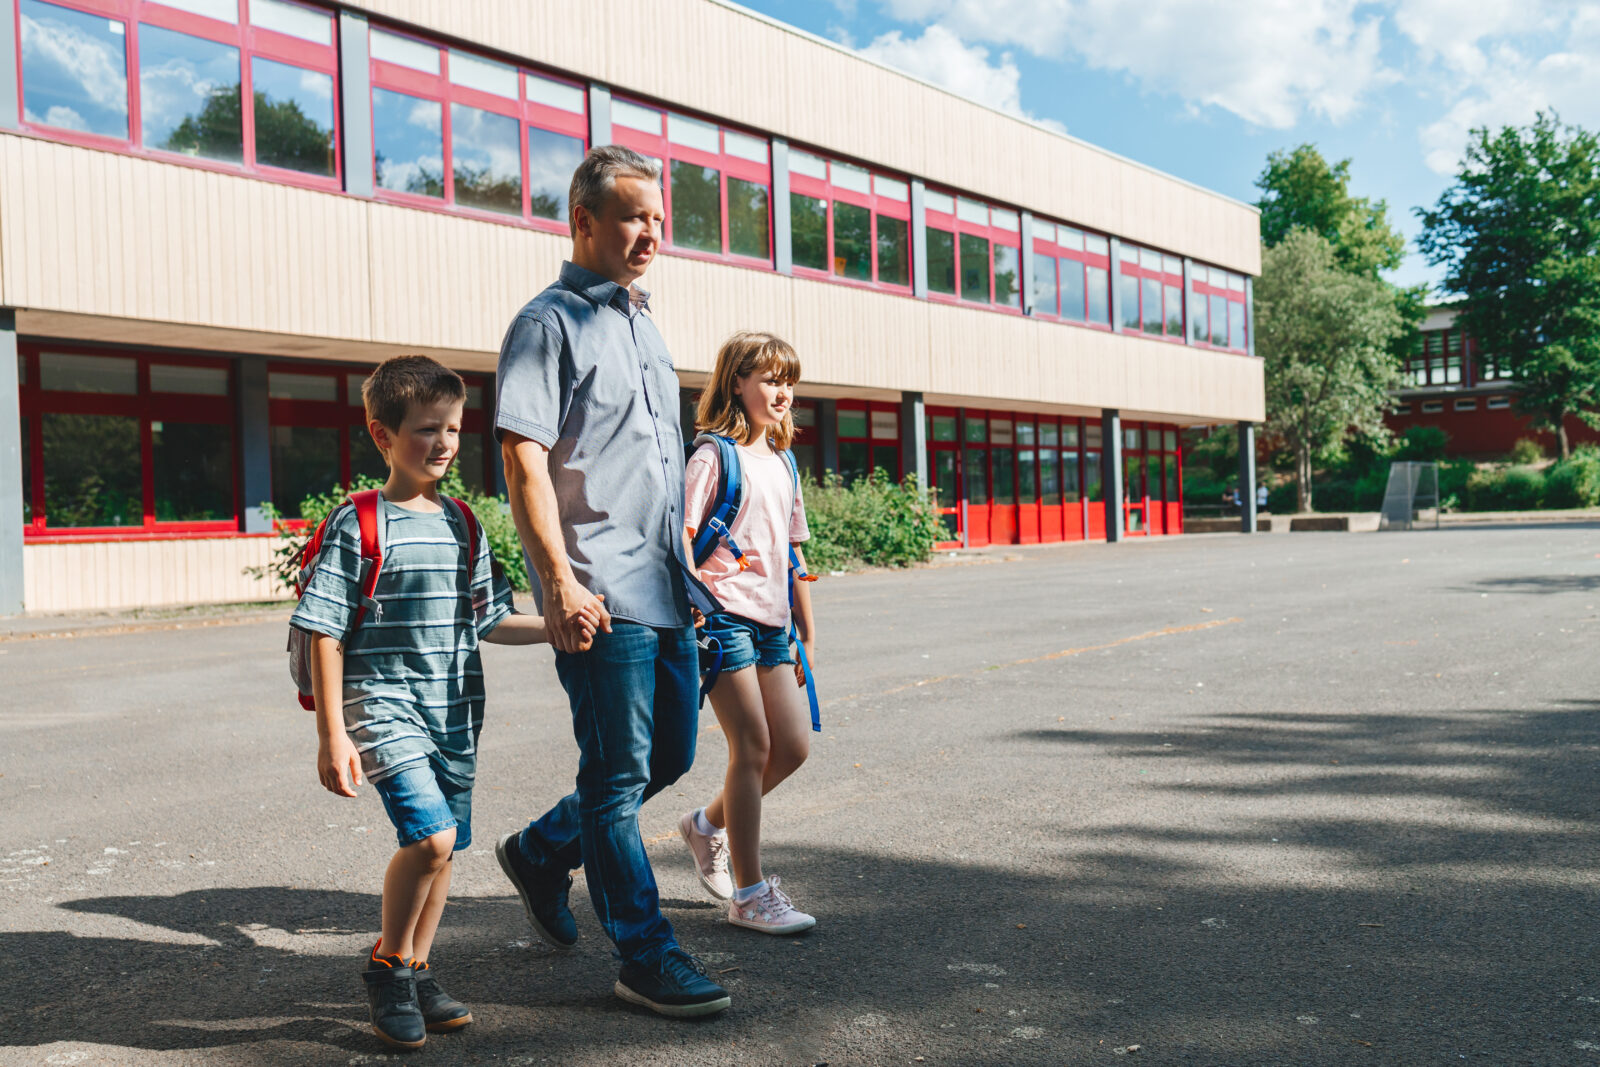 Dad accompanies or picks up children from school. Beginning of the school year, students go back to school